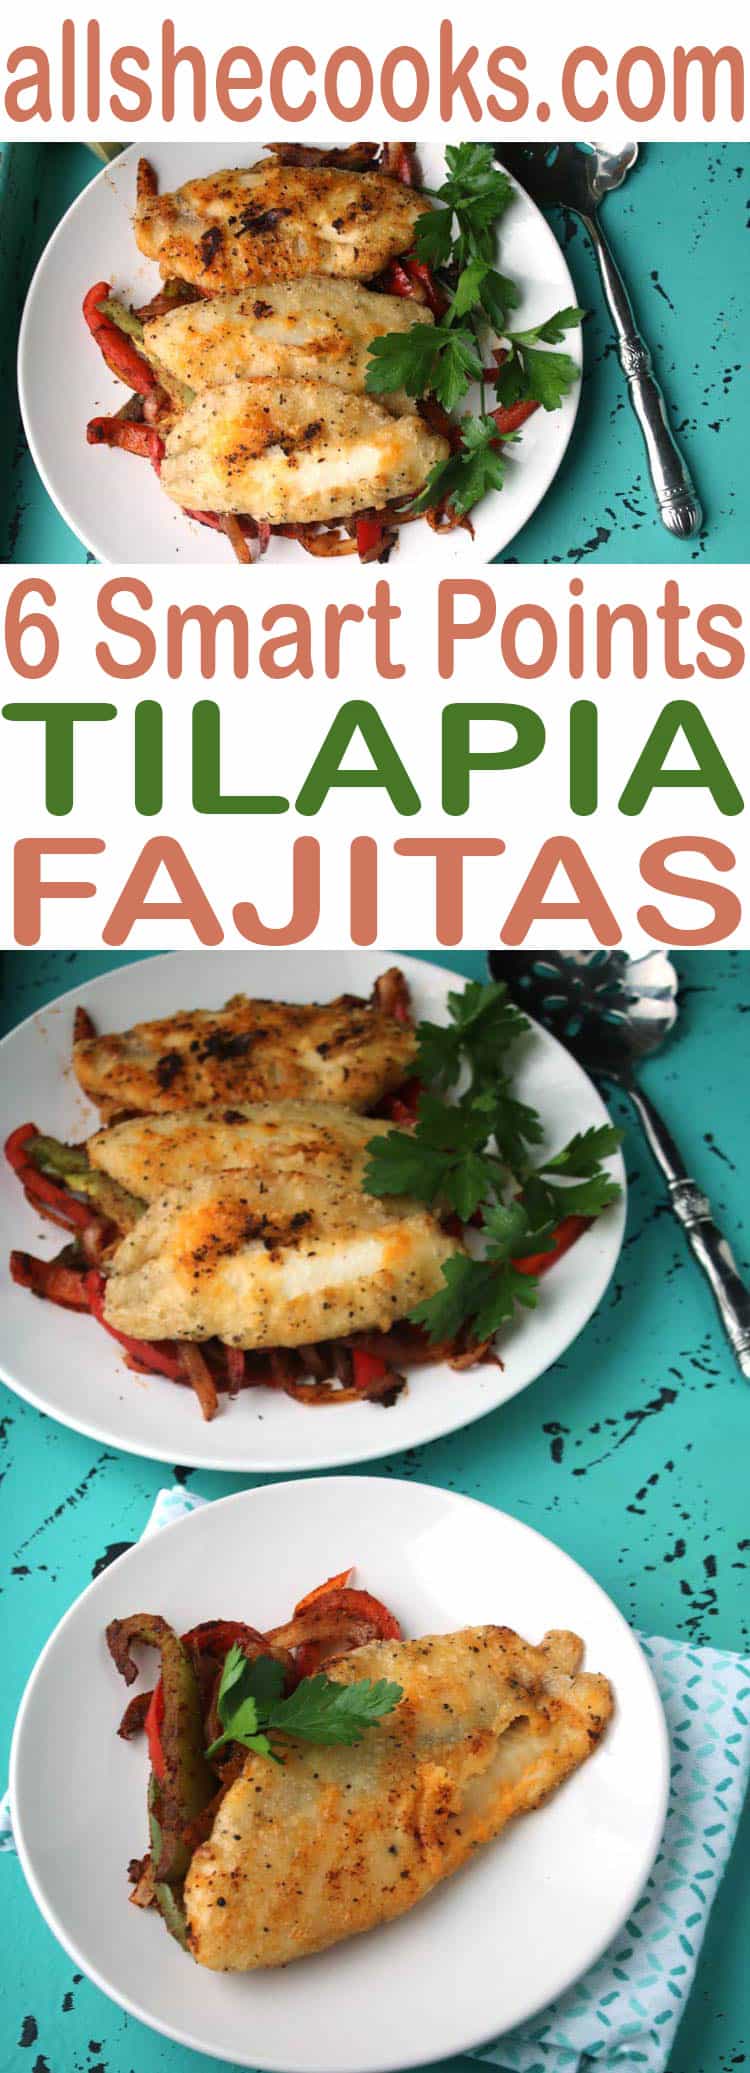 Easy Tilapia Fajitas are just 6 Weight Watchers SmartPoints. Eat good, healthy food and feel good about yourself with this recipe that takes less than 30 minutes to prepare. #WeightWatchers #SmartPoints